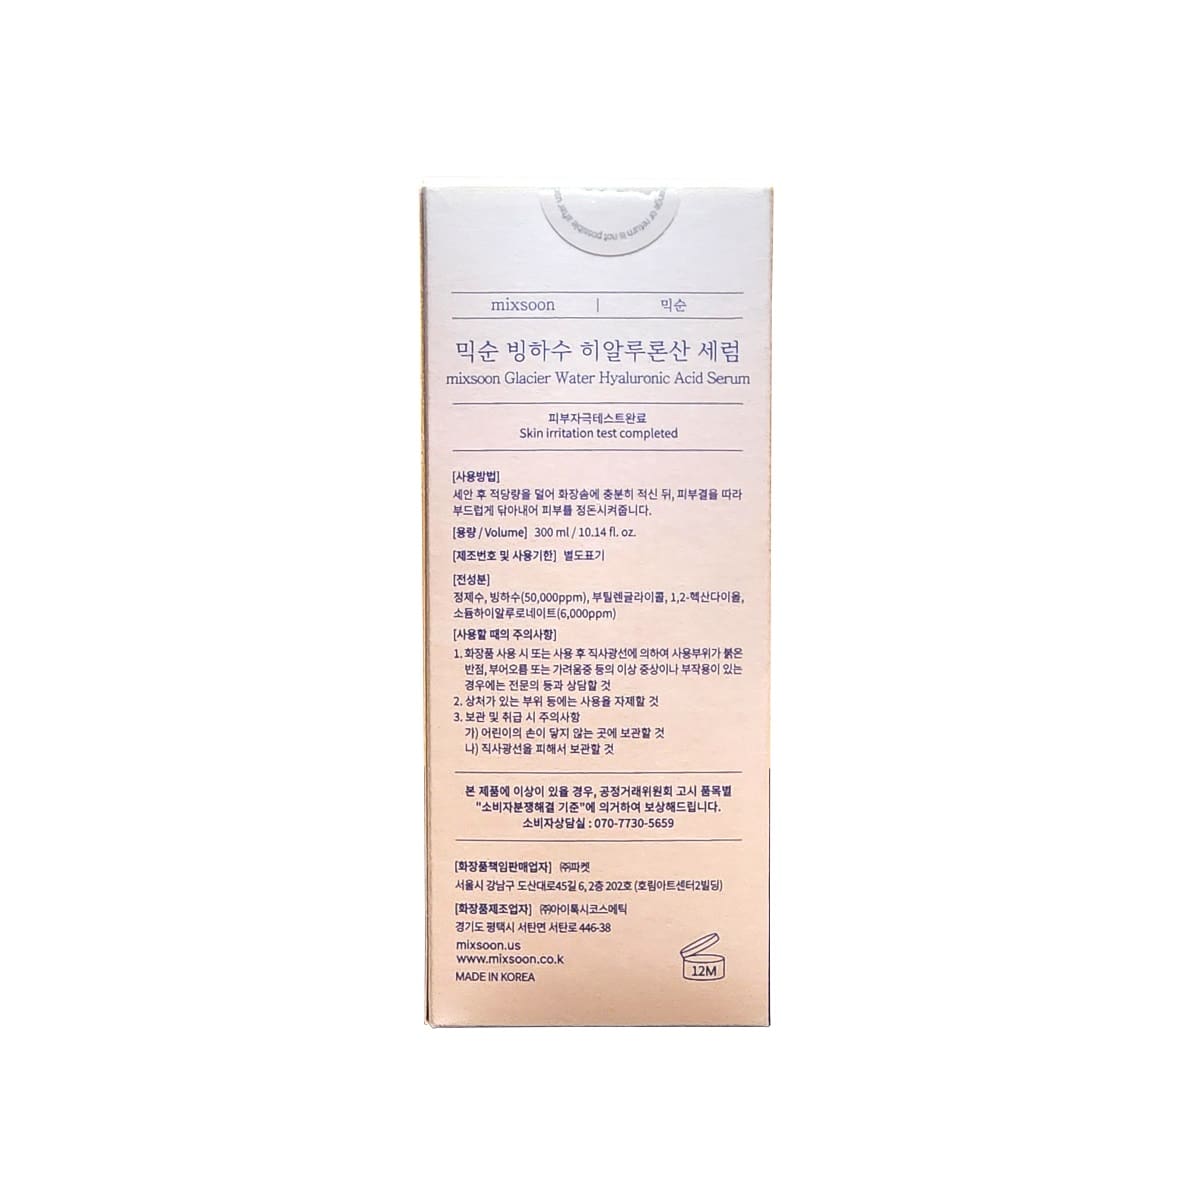 How to use, Ingredients, Cautions for mixsoon Glacier Water Hyaluronic Acid Serum (300 mL) in Korean